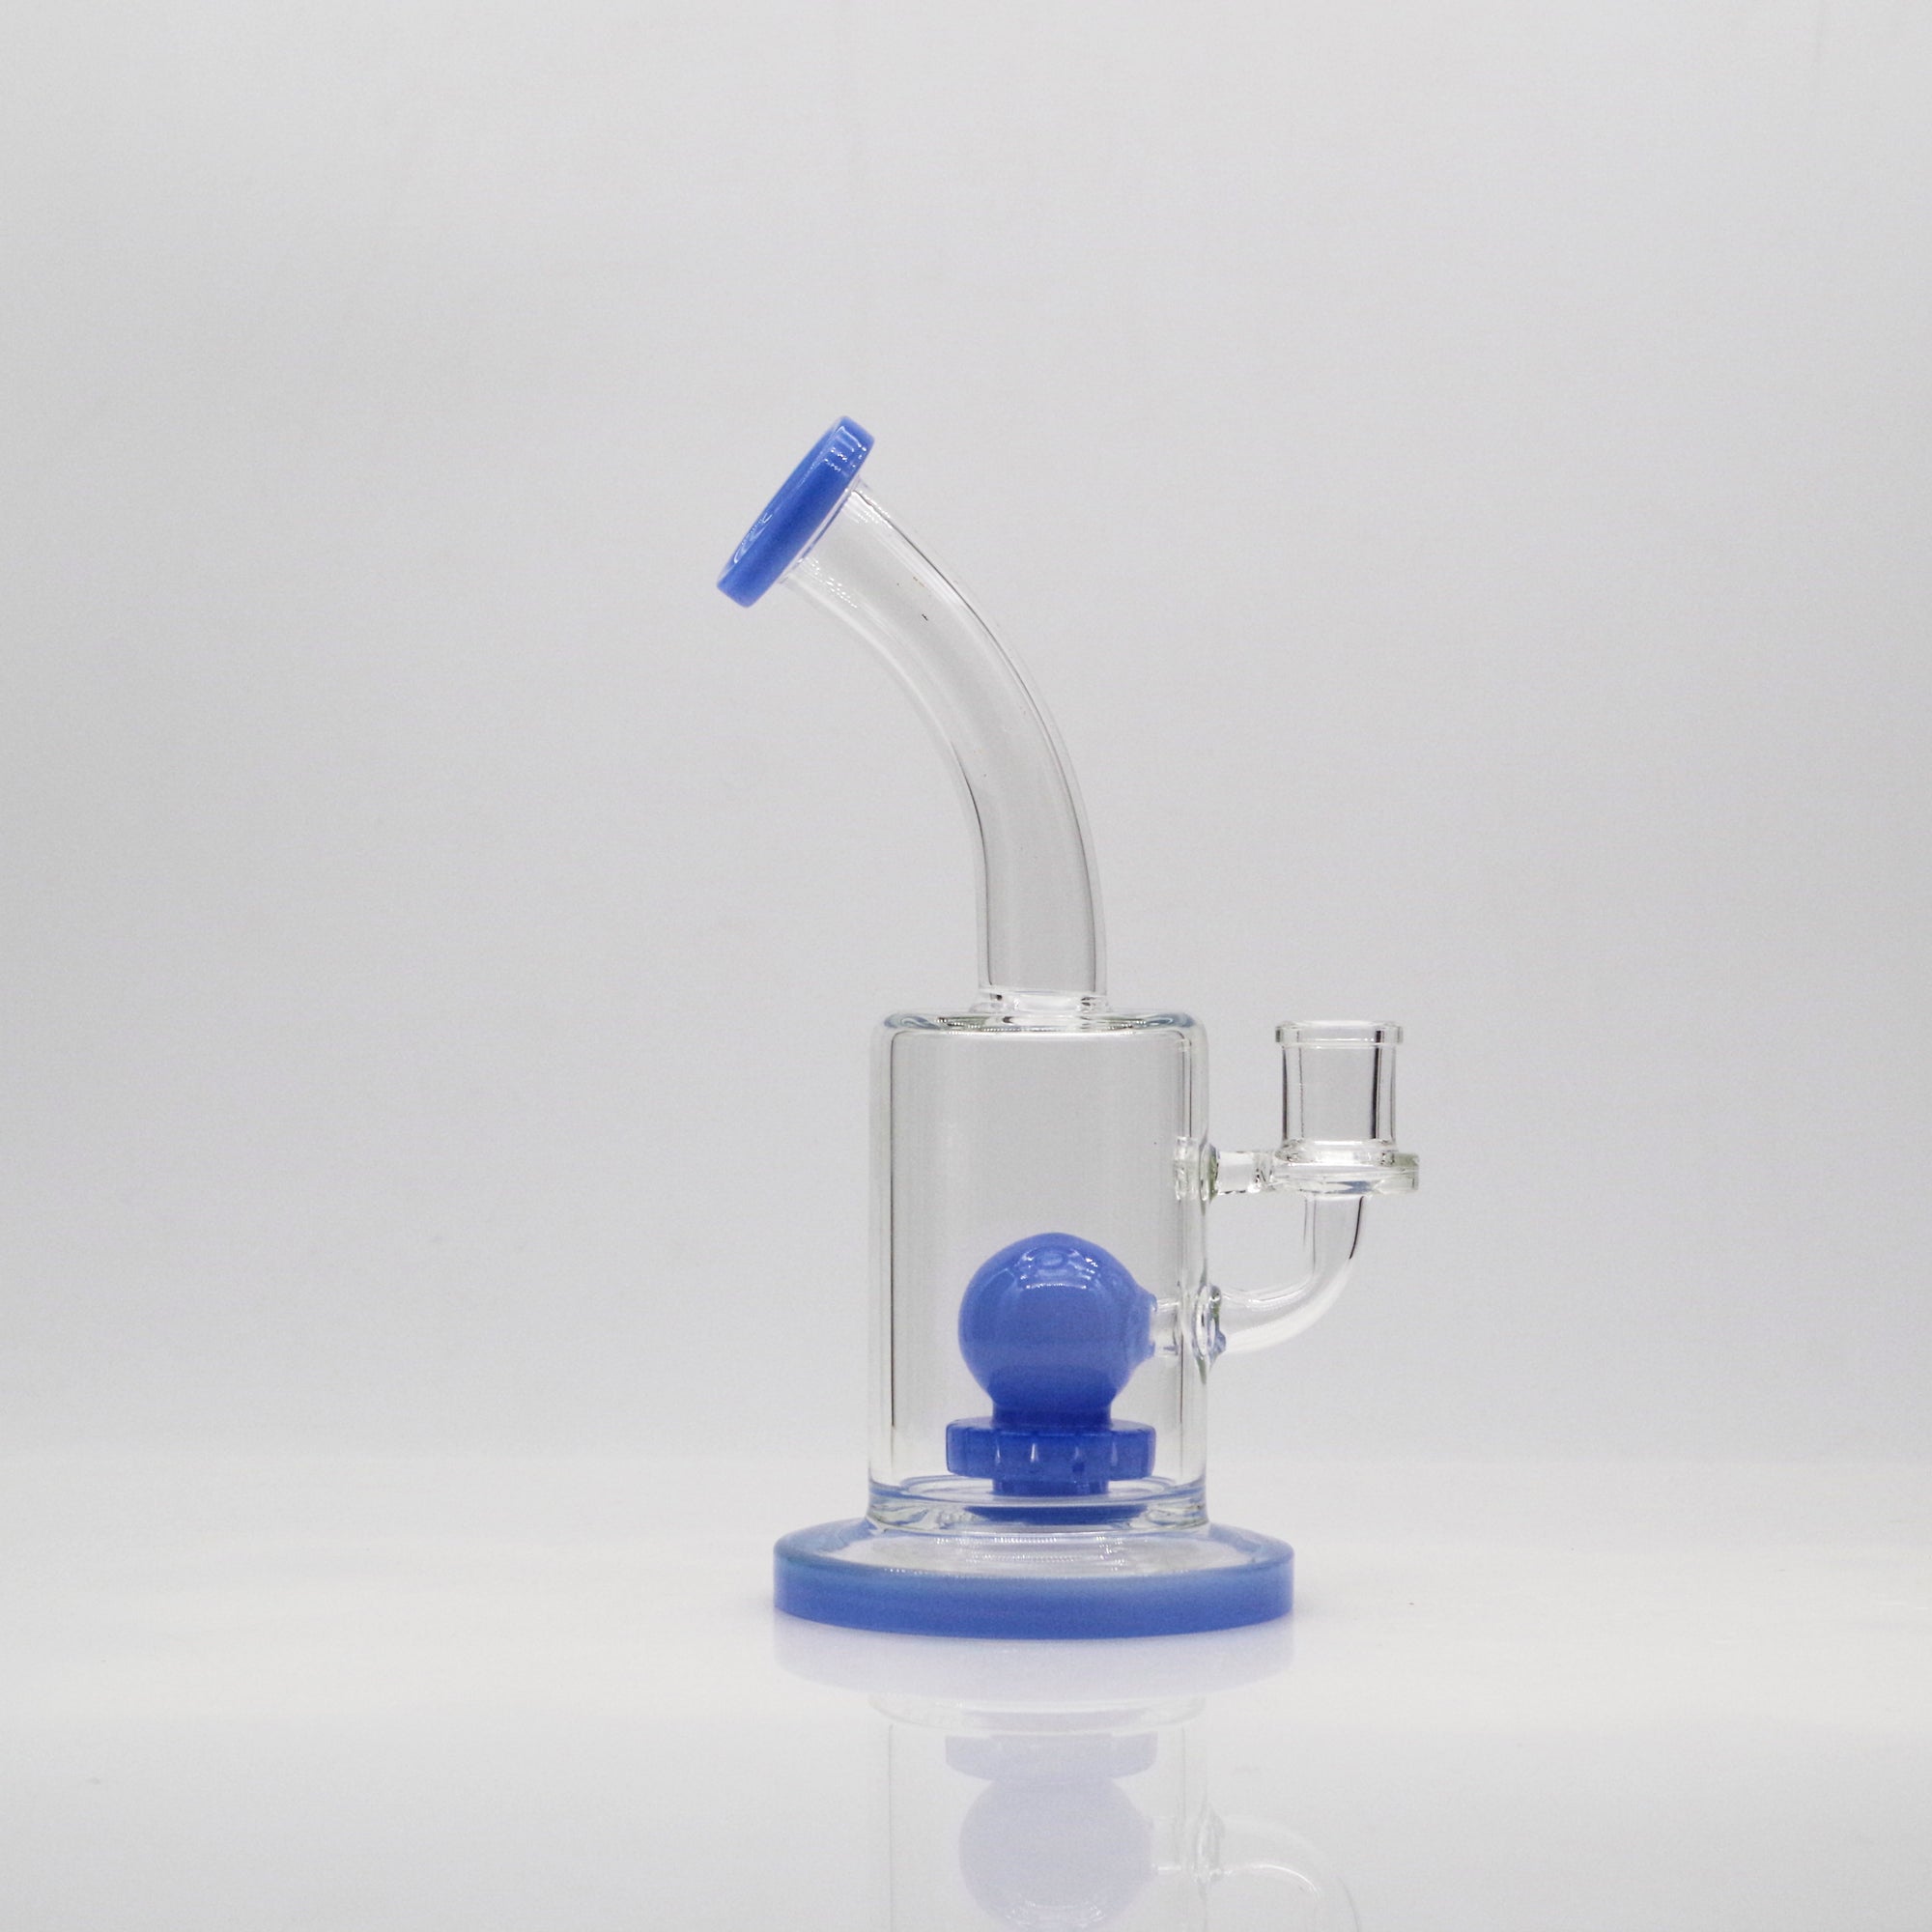 Banger Hanger with Internal Ball and Perc (Online Only) - Solid Blue